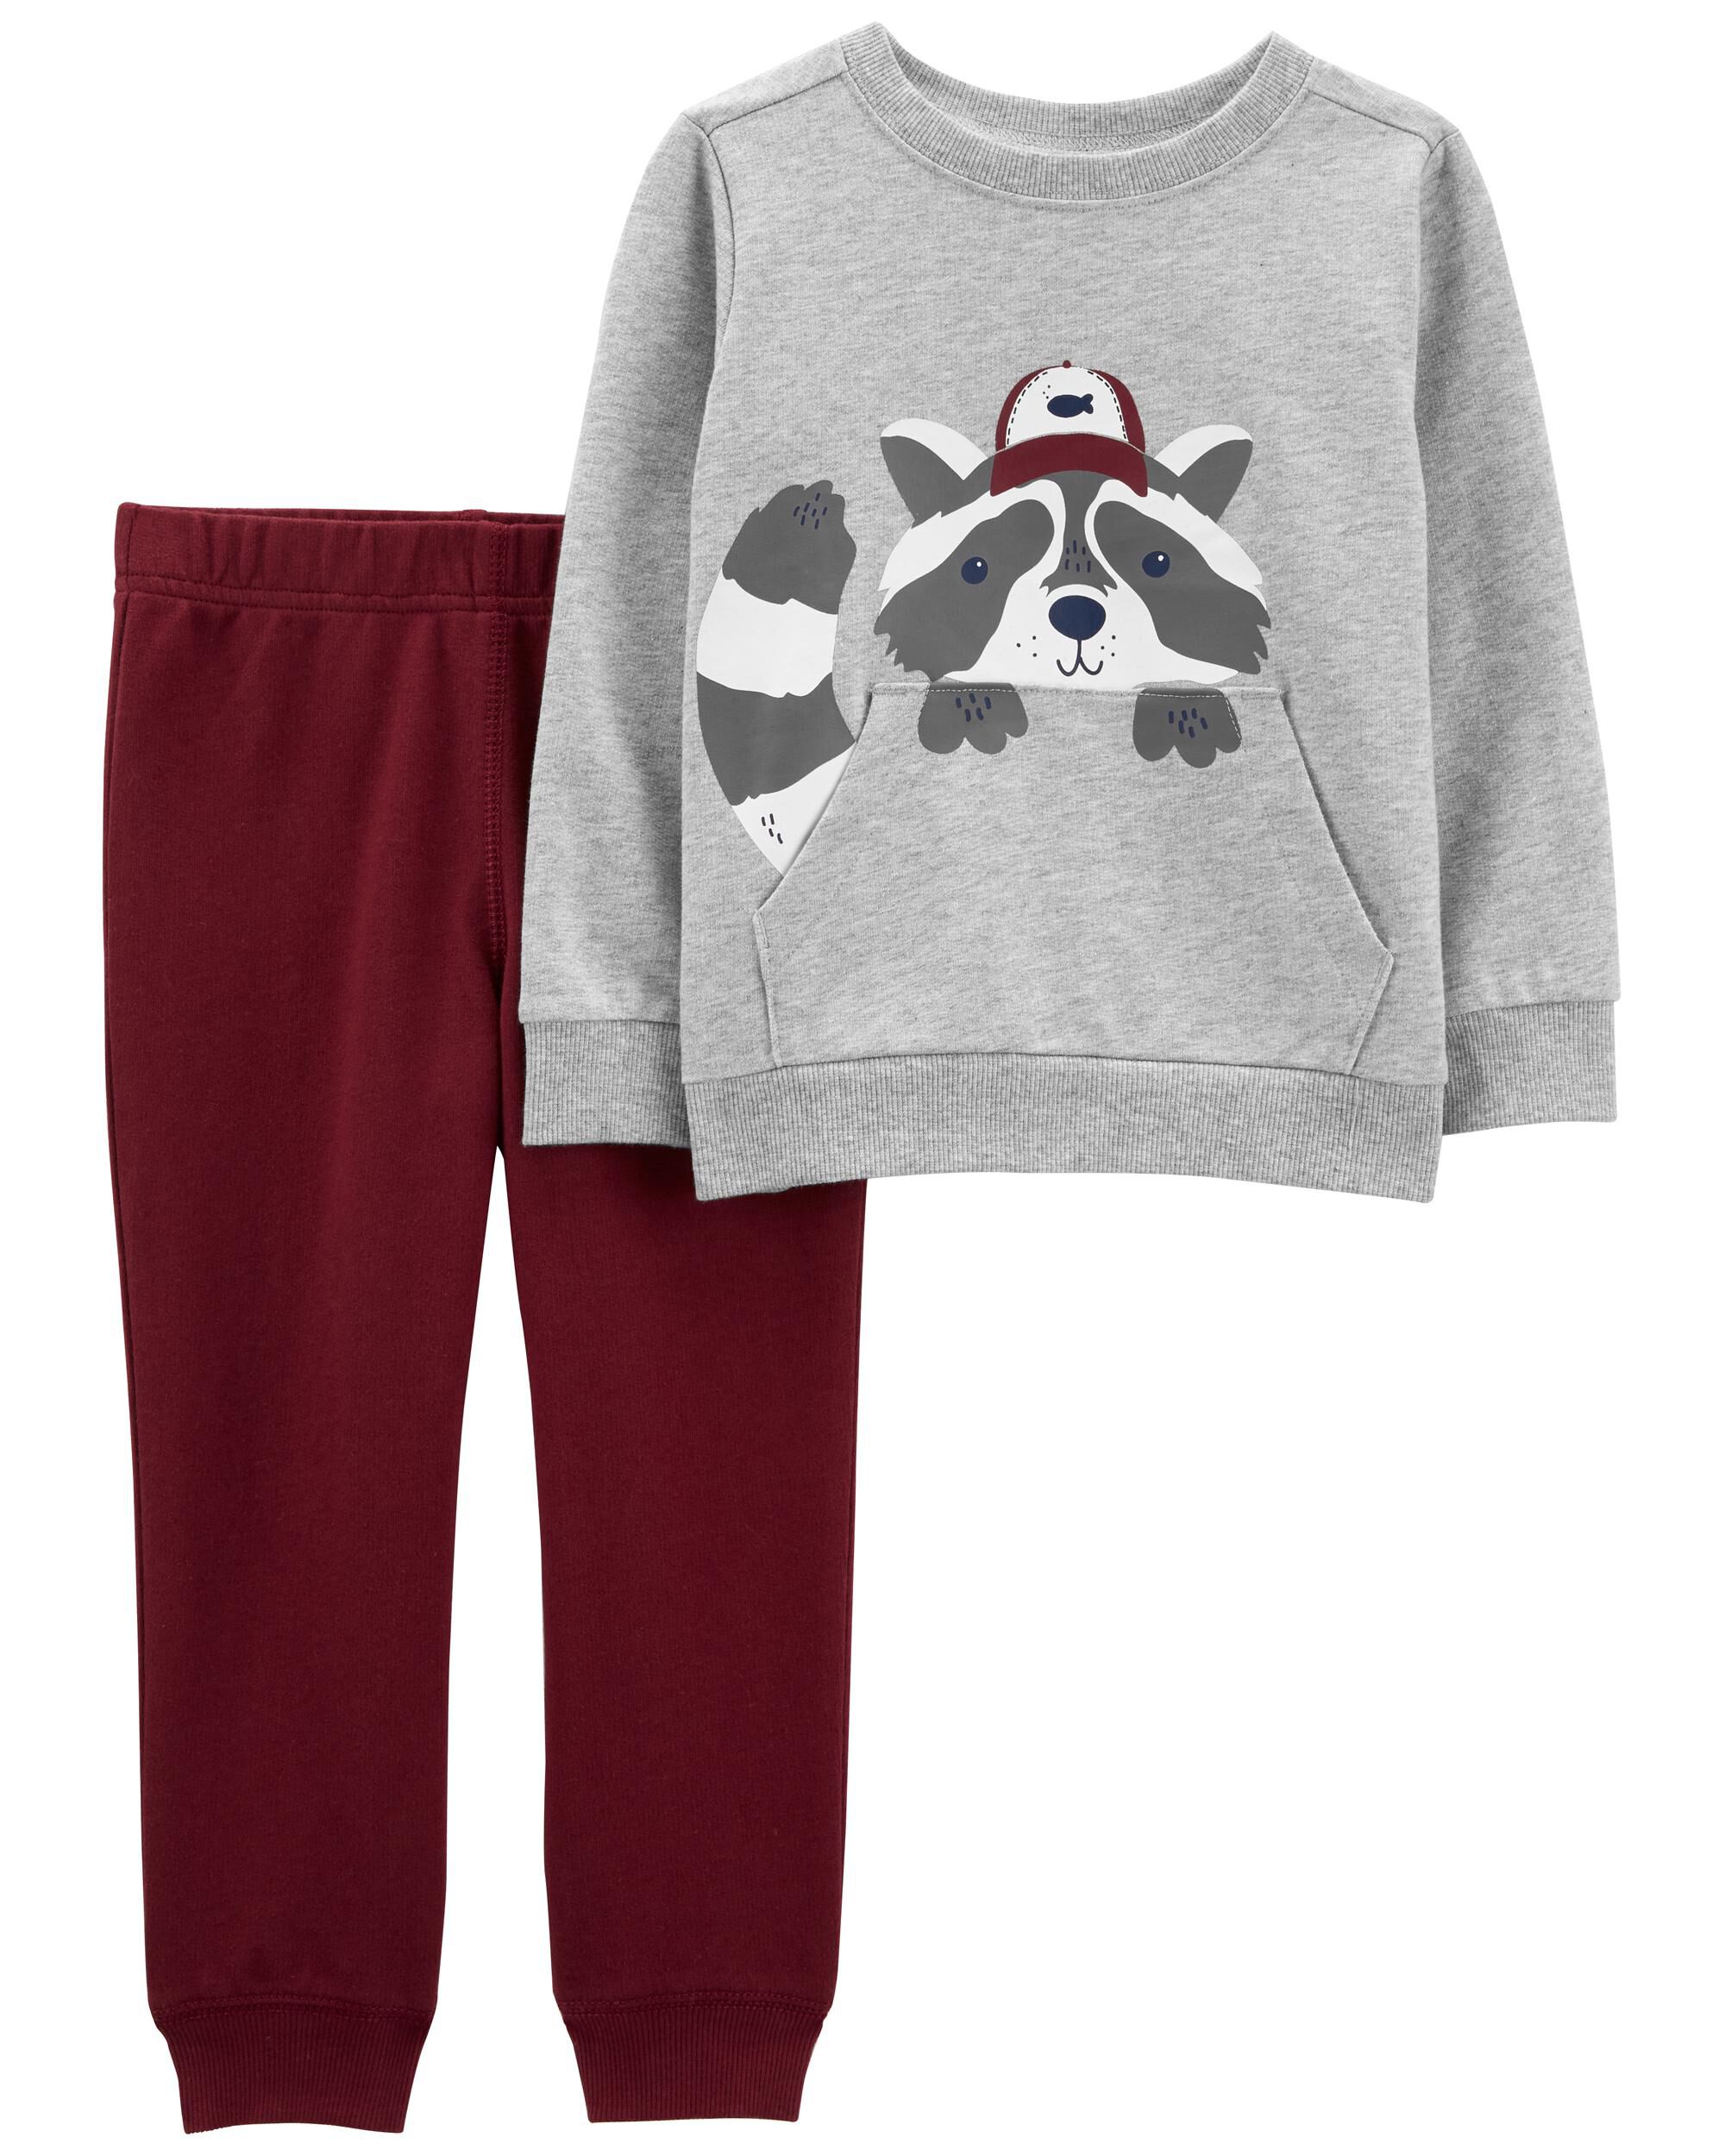 Carters Baby 2-Piece Raccoon Pullover & Jogger Set